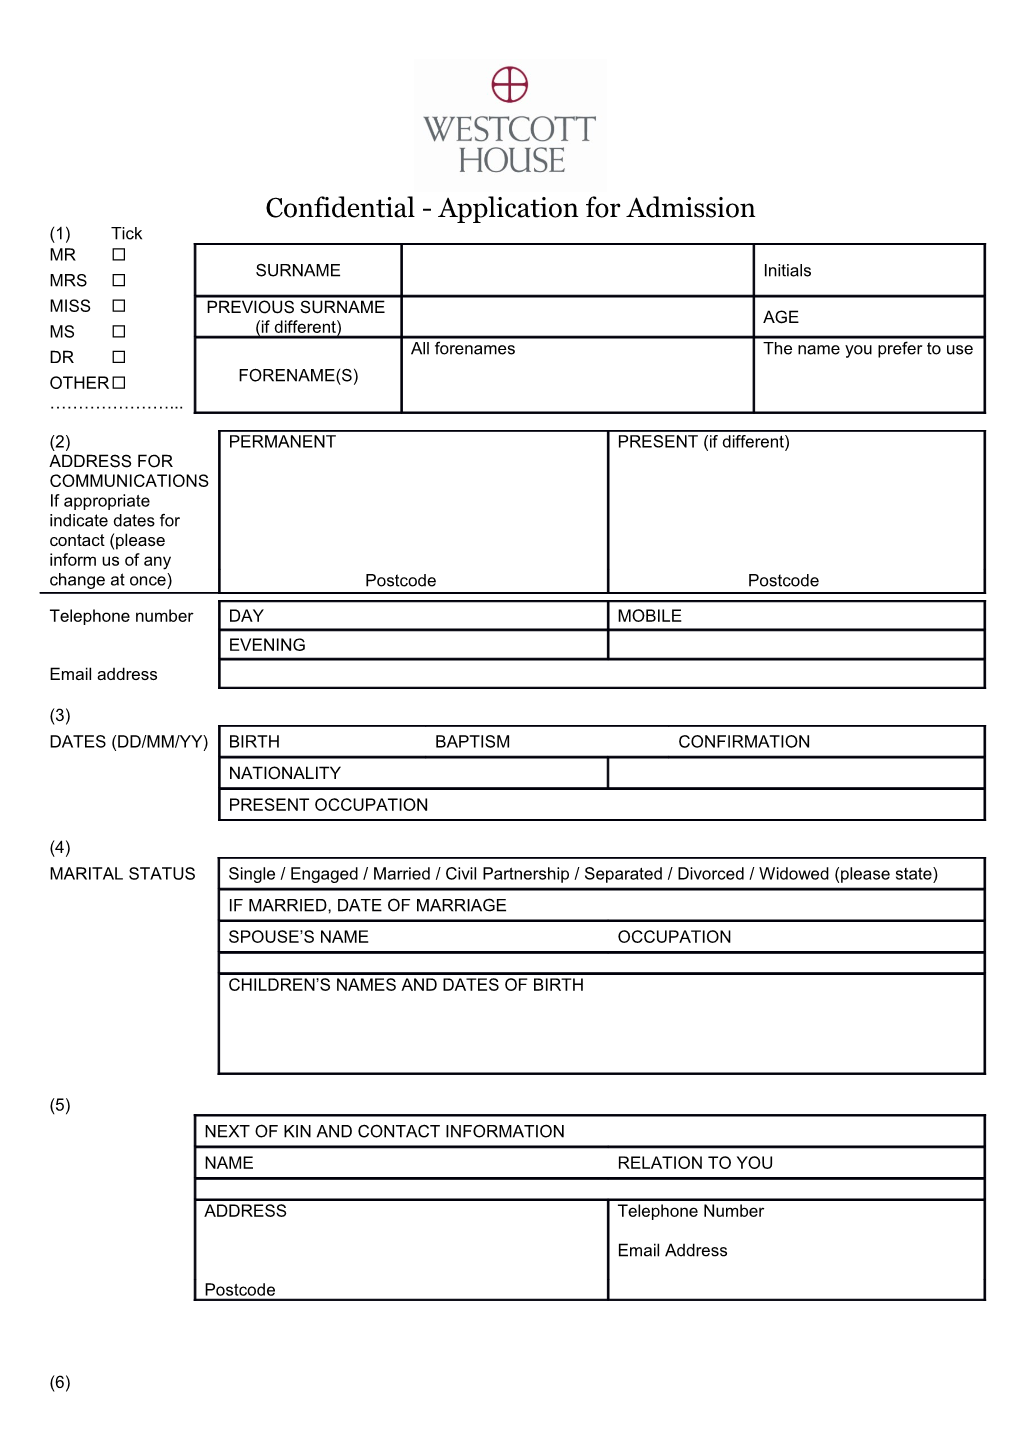 Confidential - Application for Admission